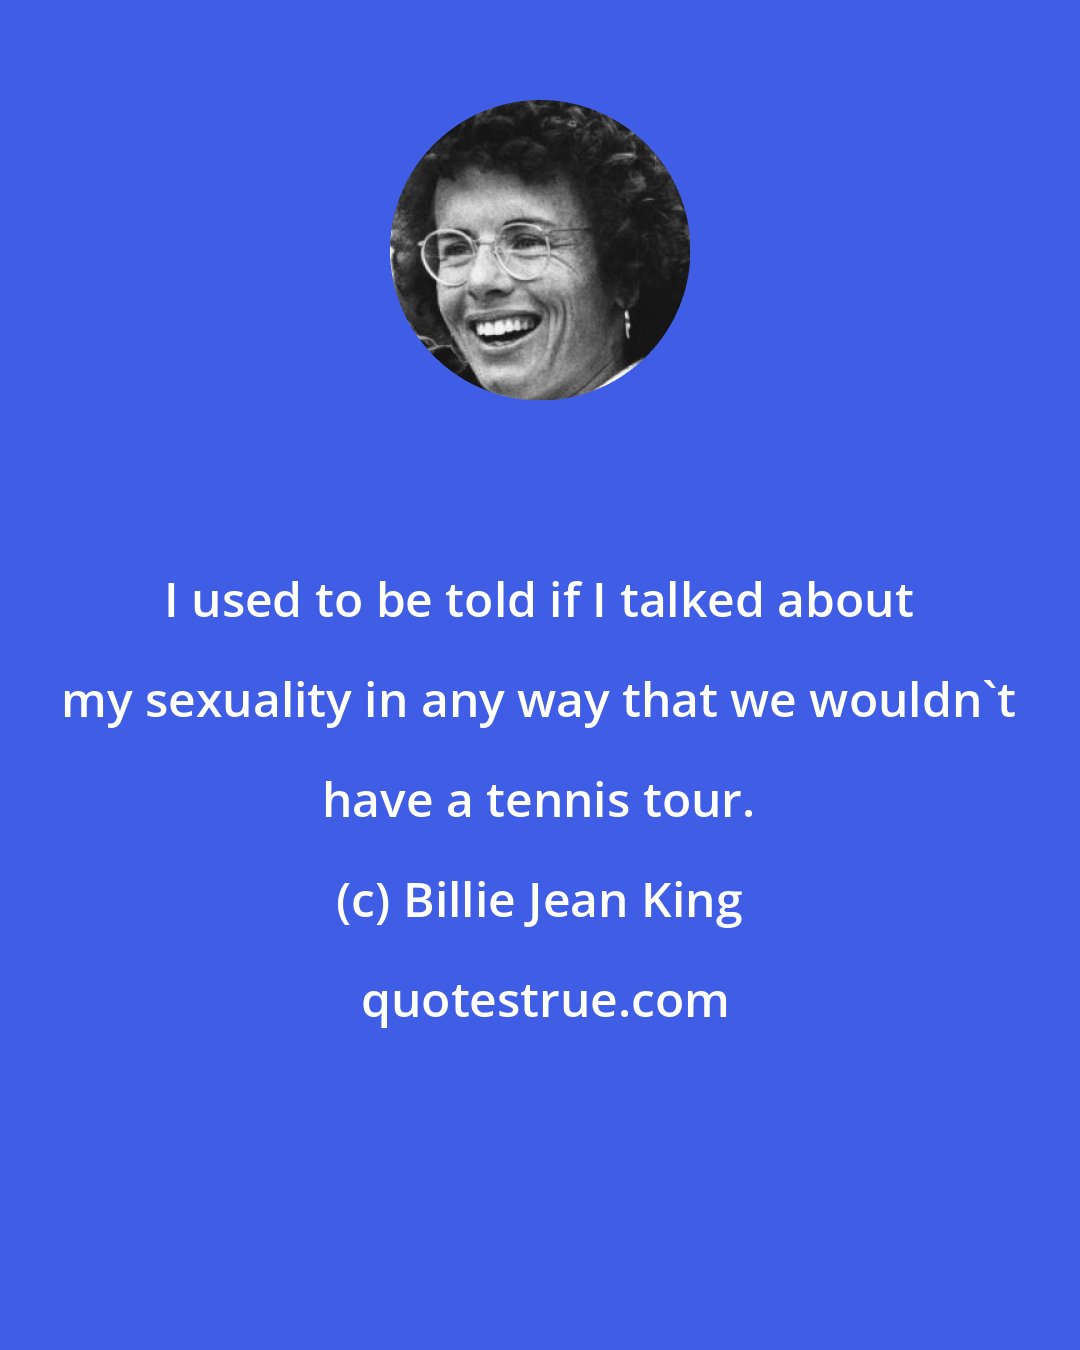 Billie Jean King: I used to be told if I talked about my sexuality in any way that we wouldn't have a tennis tour.